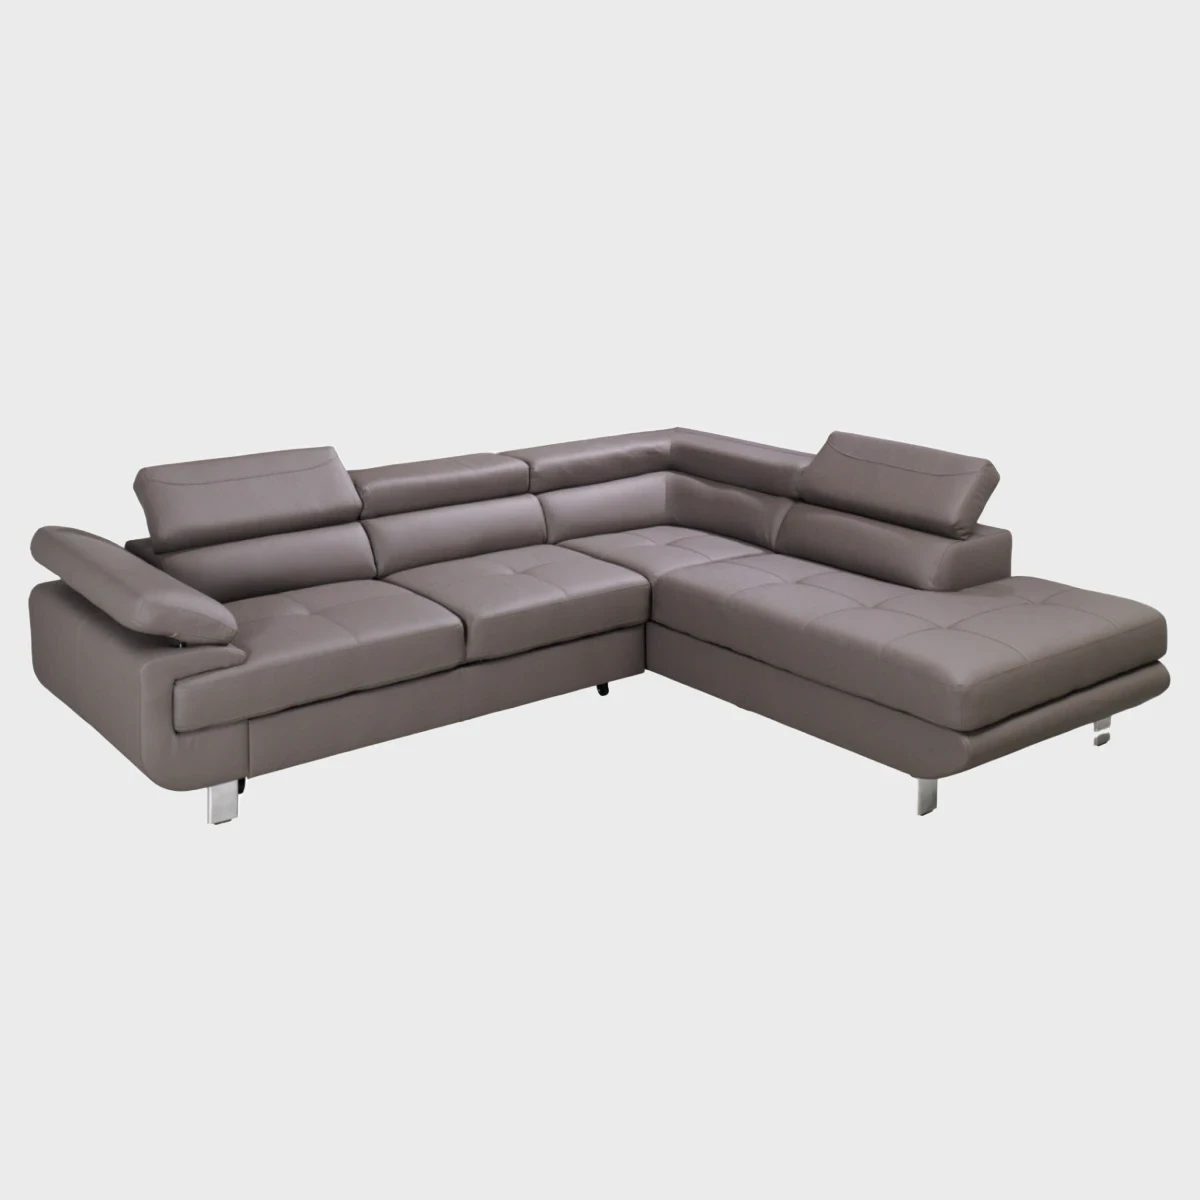 Lotos Corner Sofa Bed Right Brown Leather Vienna 06